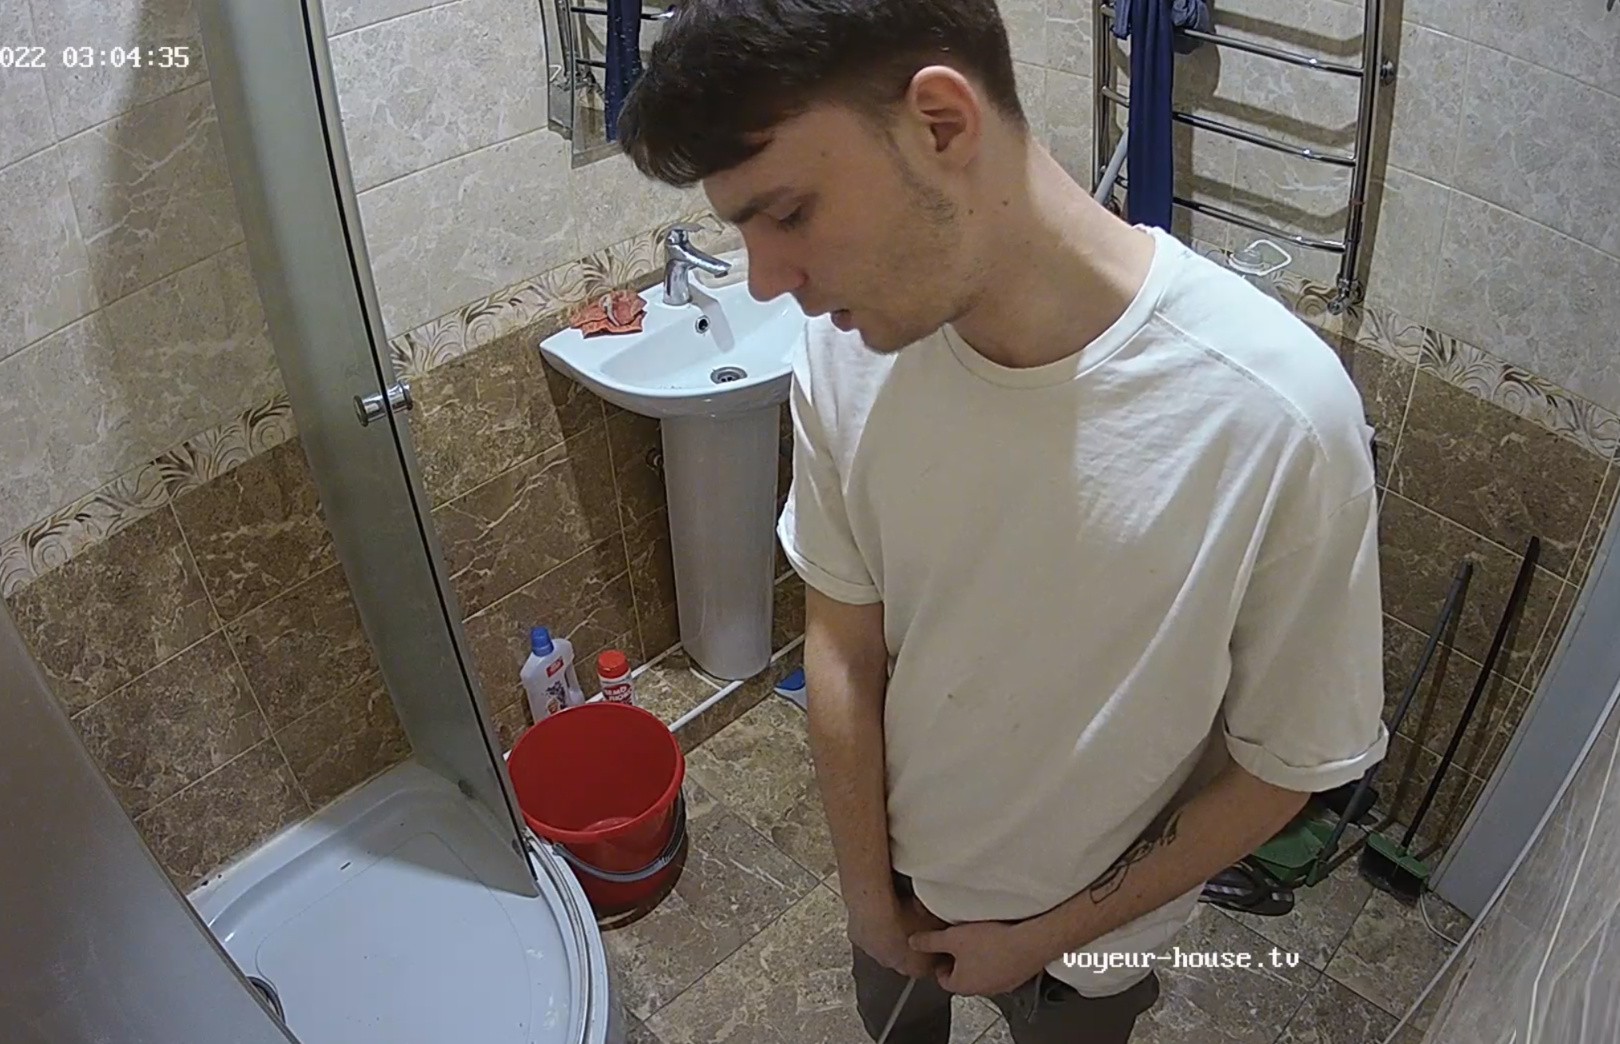 Watch Regular daily live stuff Guest guy peeing 2 Mar 2022 Naked people with Medea in Bathroom The biggest Voyeur Videos gallery picture